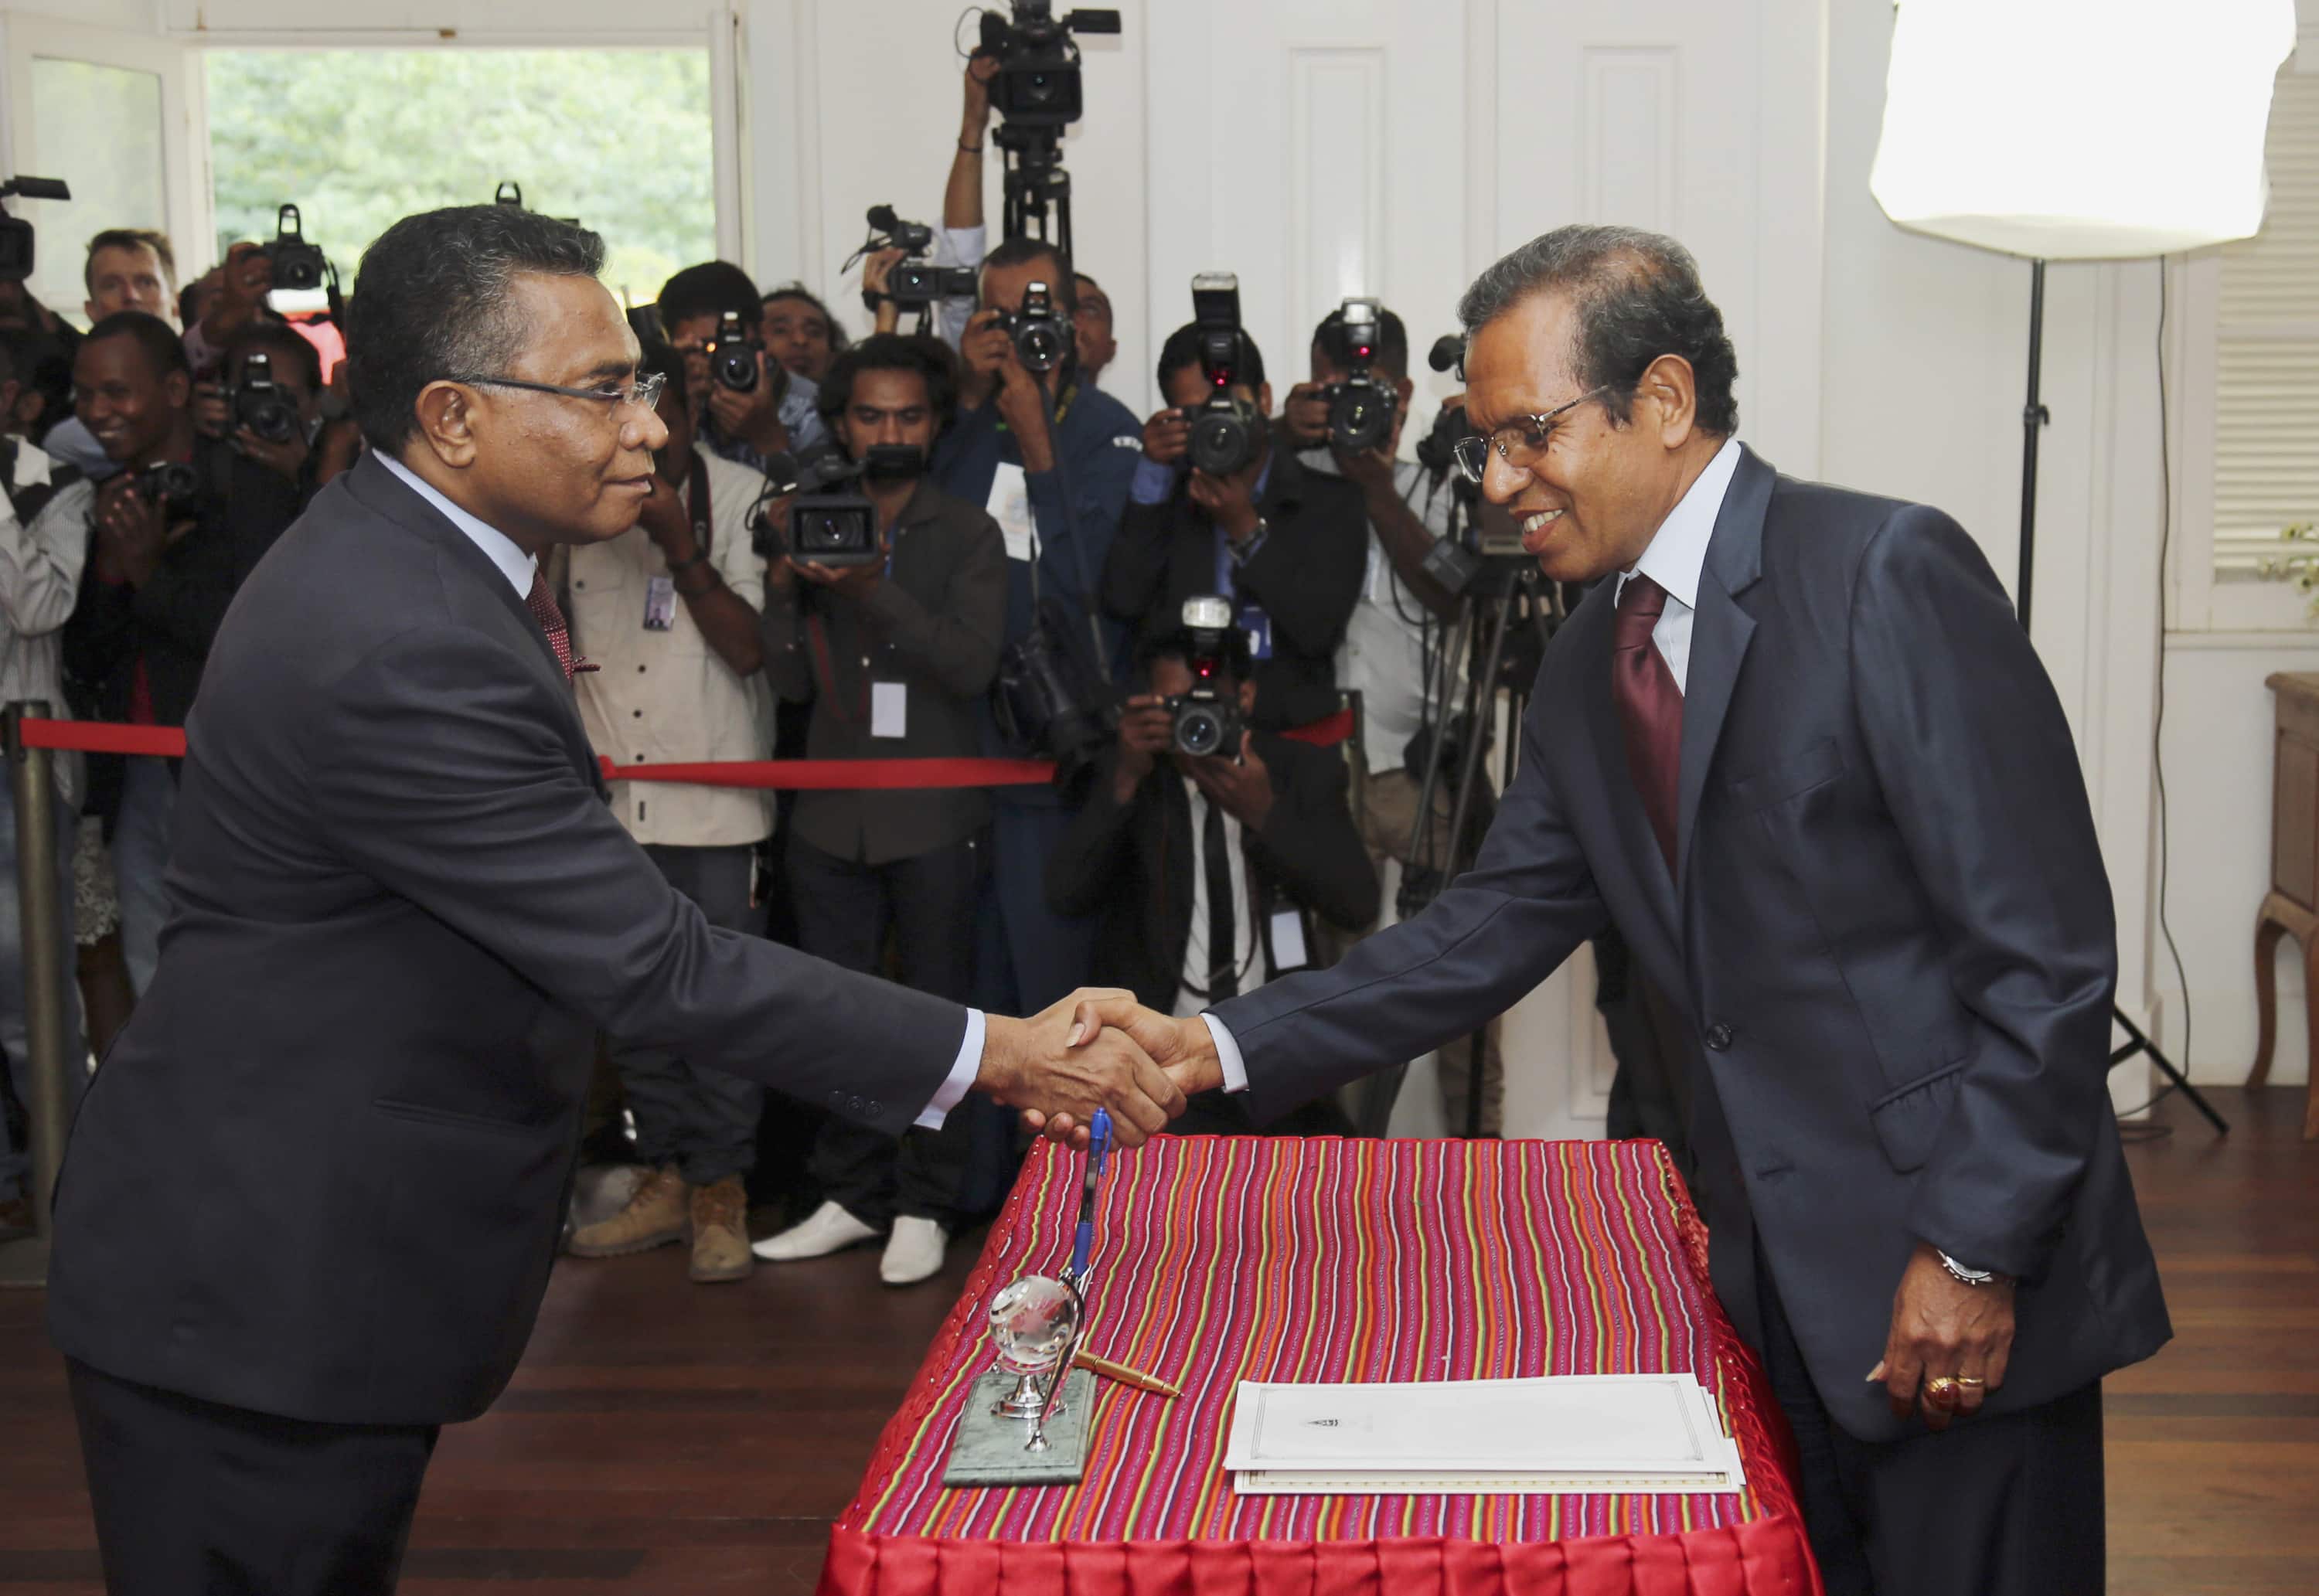 Reporters look on as East Timor's new Prime Minister Rui Araujo (L) shakes hands with President Taur Matan Ruak (R) at an innauguration ceremony at the President's office in Dili, 16 February 2015, REUTERS/Lirio Da Fonseca